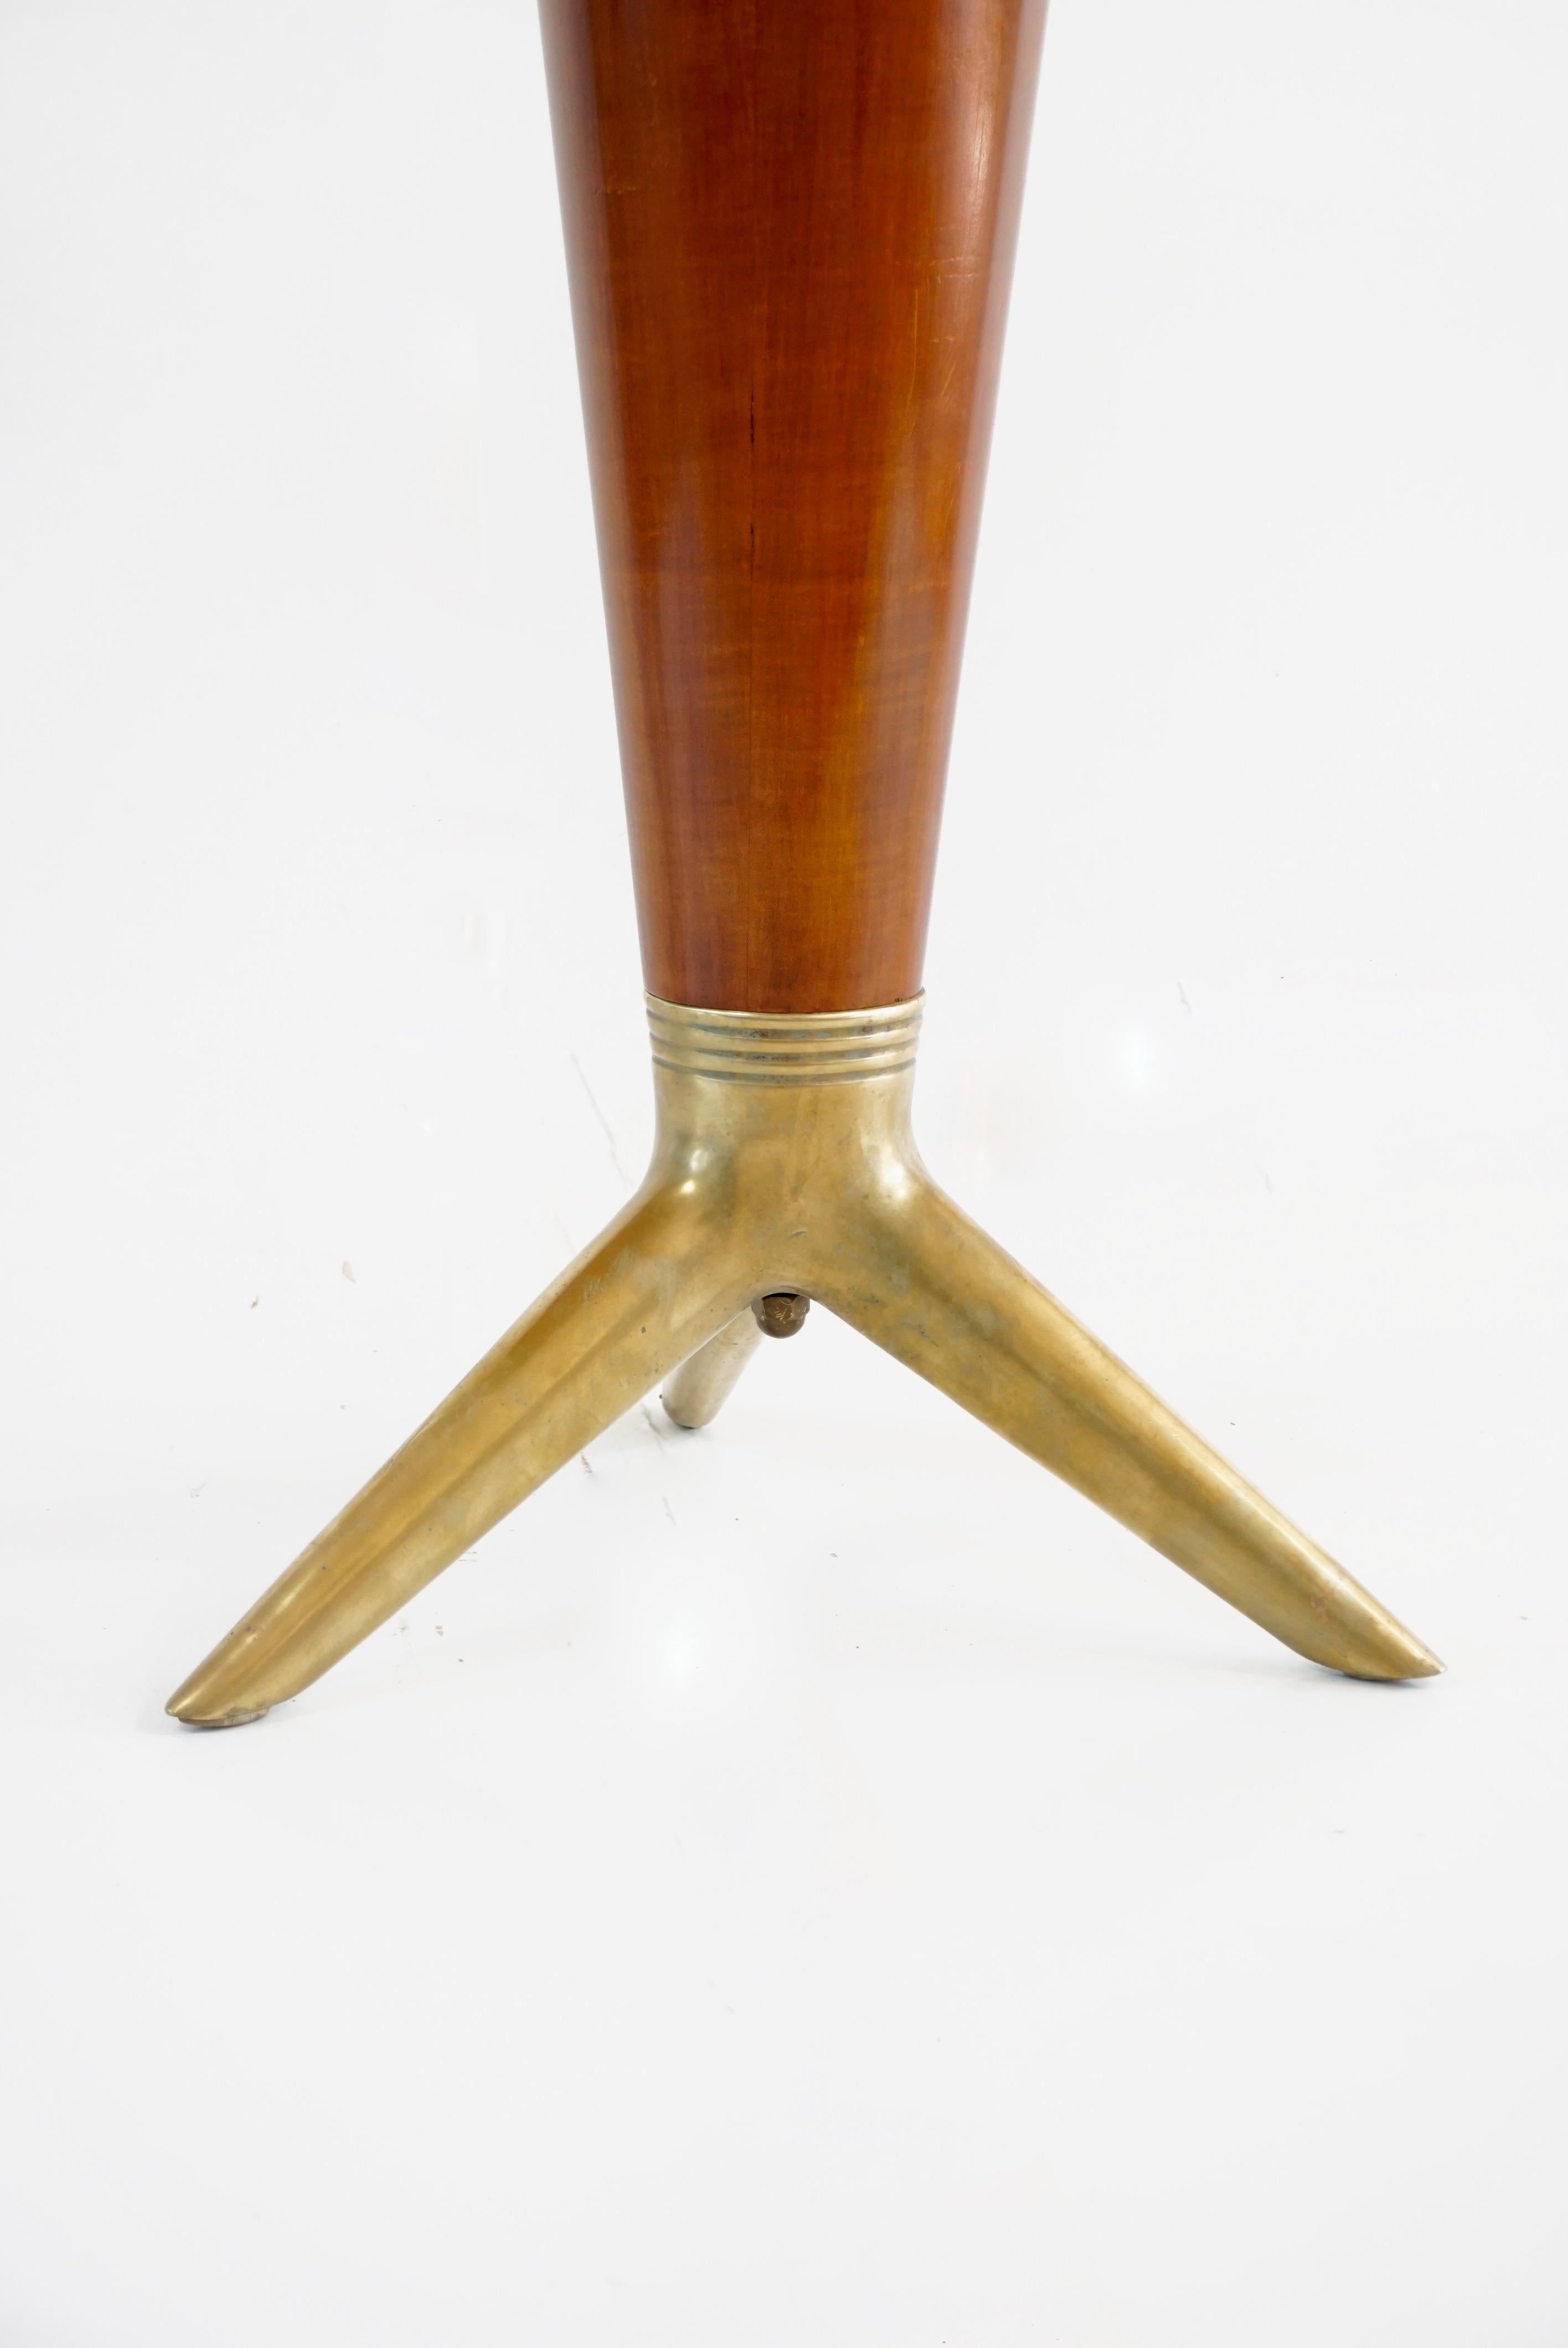 Rare Maple and Brass Round Center Table by I.S.A. Bergamo 1950 For Sale 4